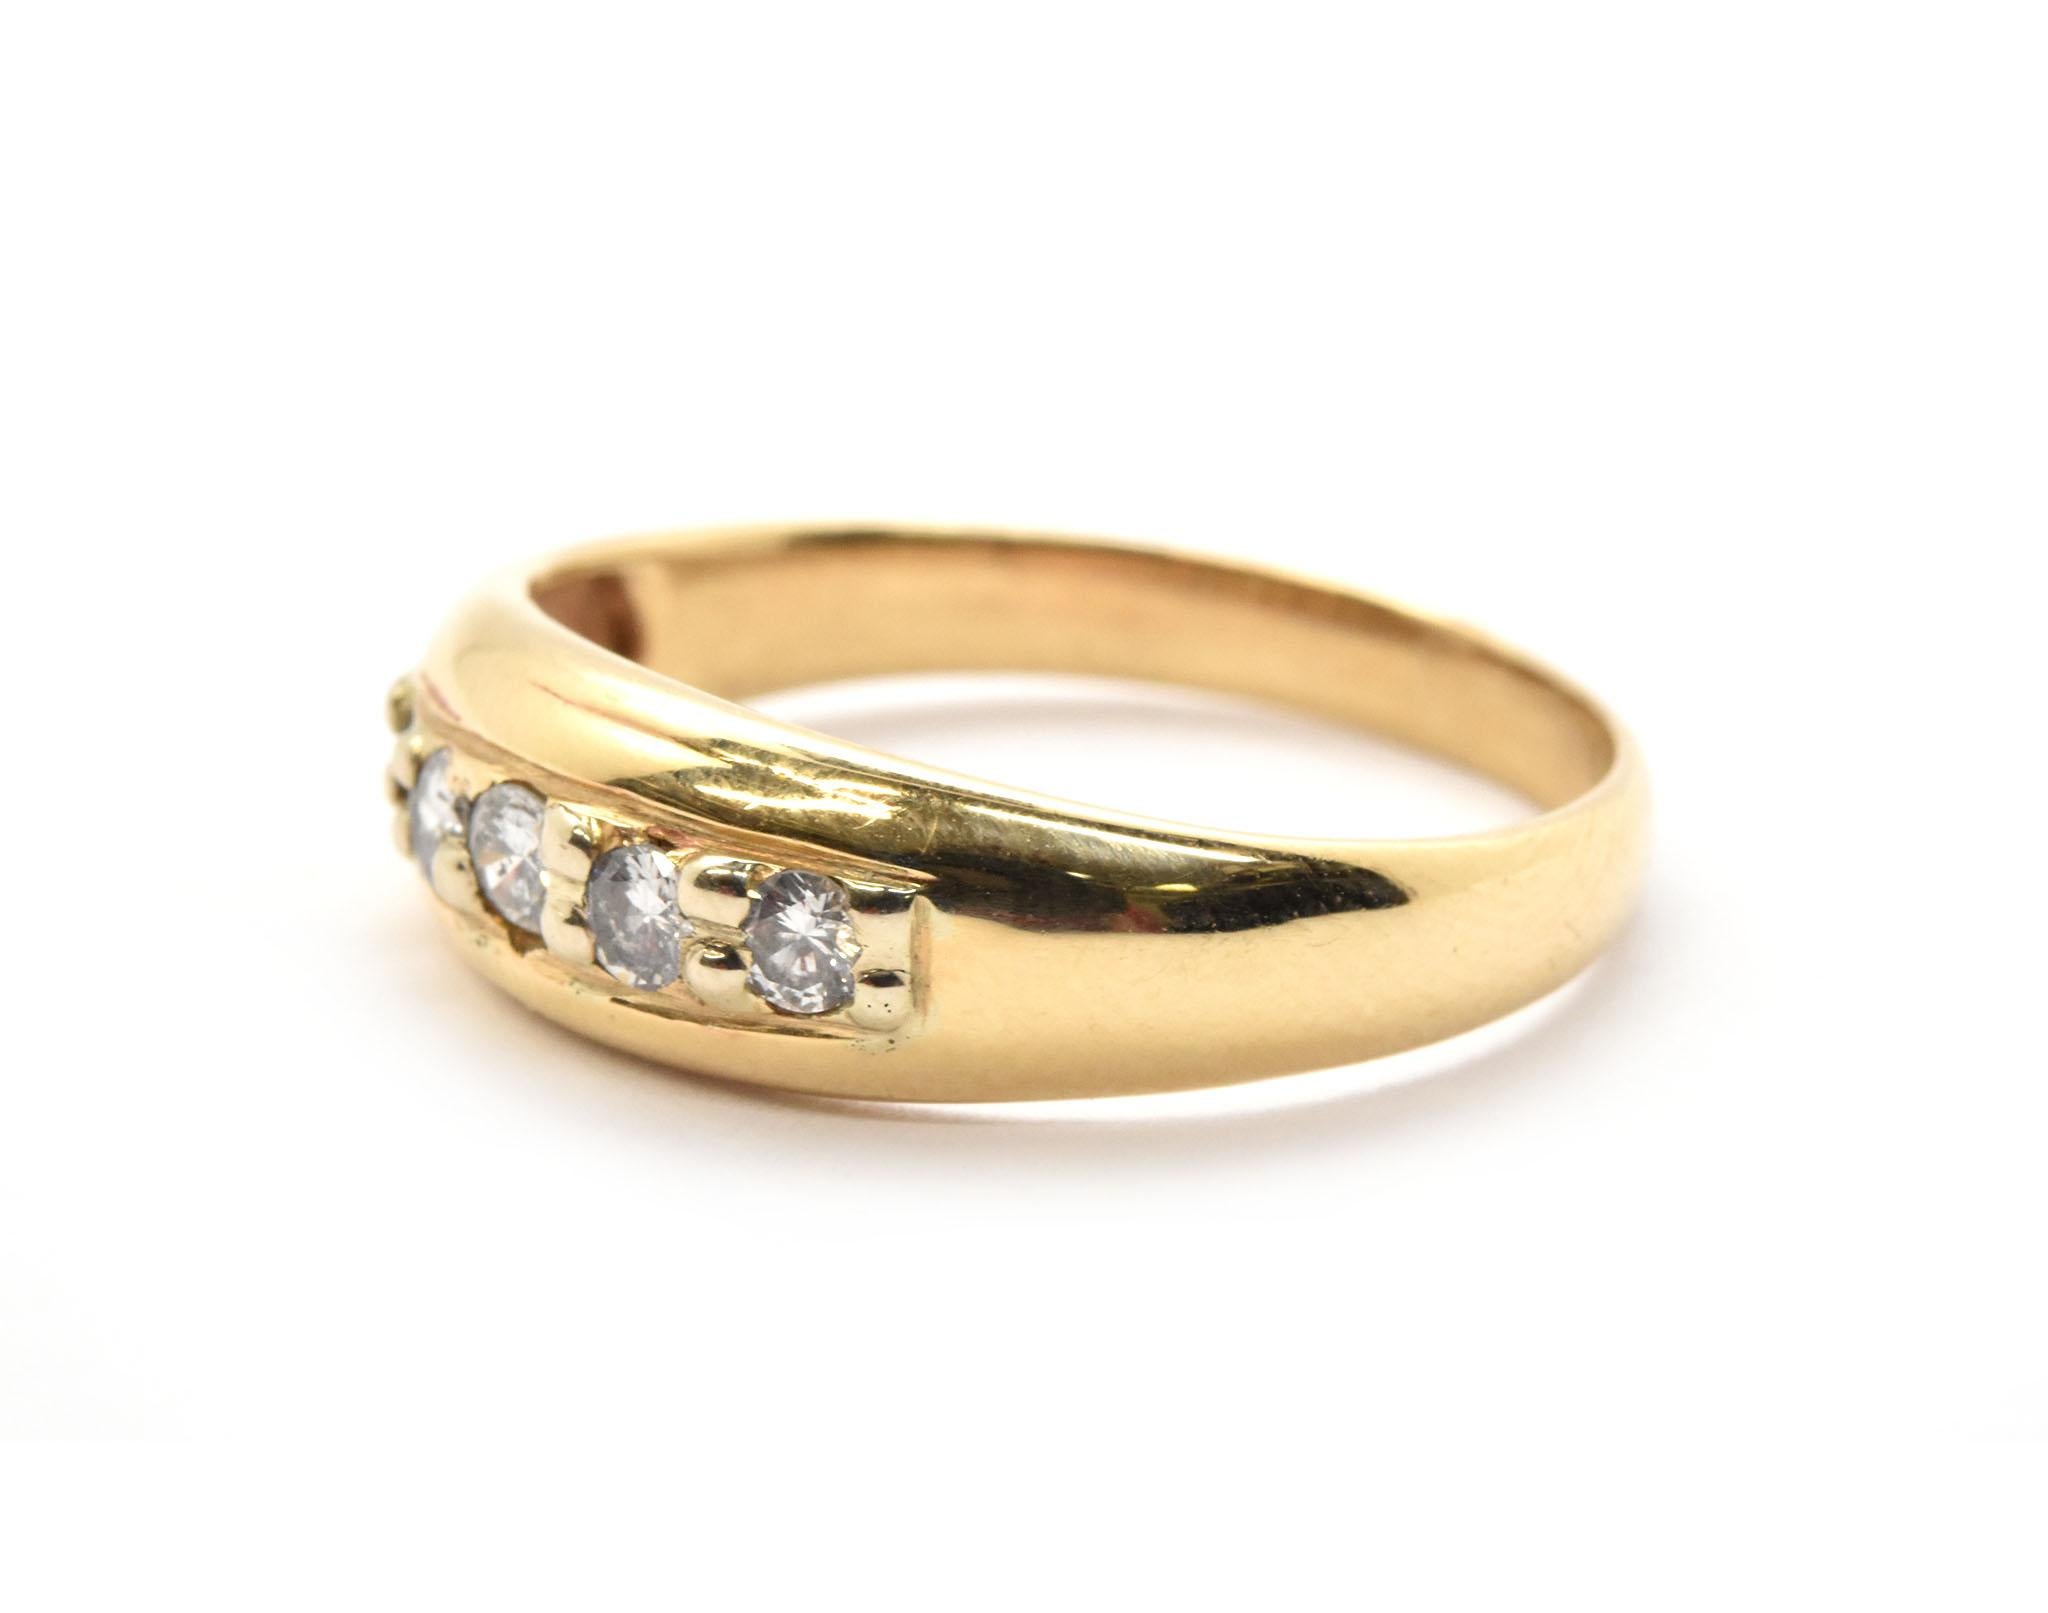 This men’s wedding band is crafted in 14 karat yellow gold and set with five round brilliant cut diamond melee down the center. The diamond total weight is 0.35Ctw with G-H color and SI1 clarity. It measures 6.6mm wide at the top, weighs 4.07 grams,